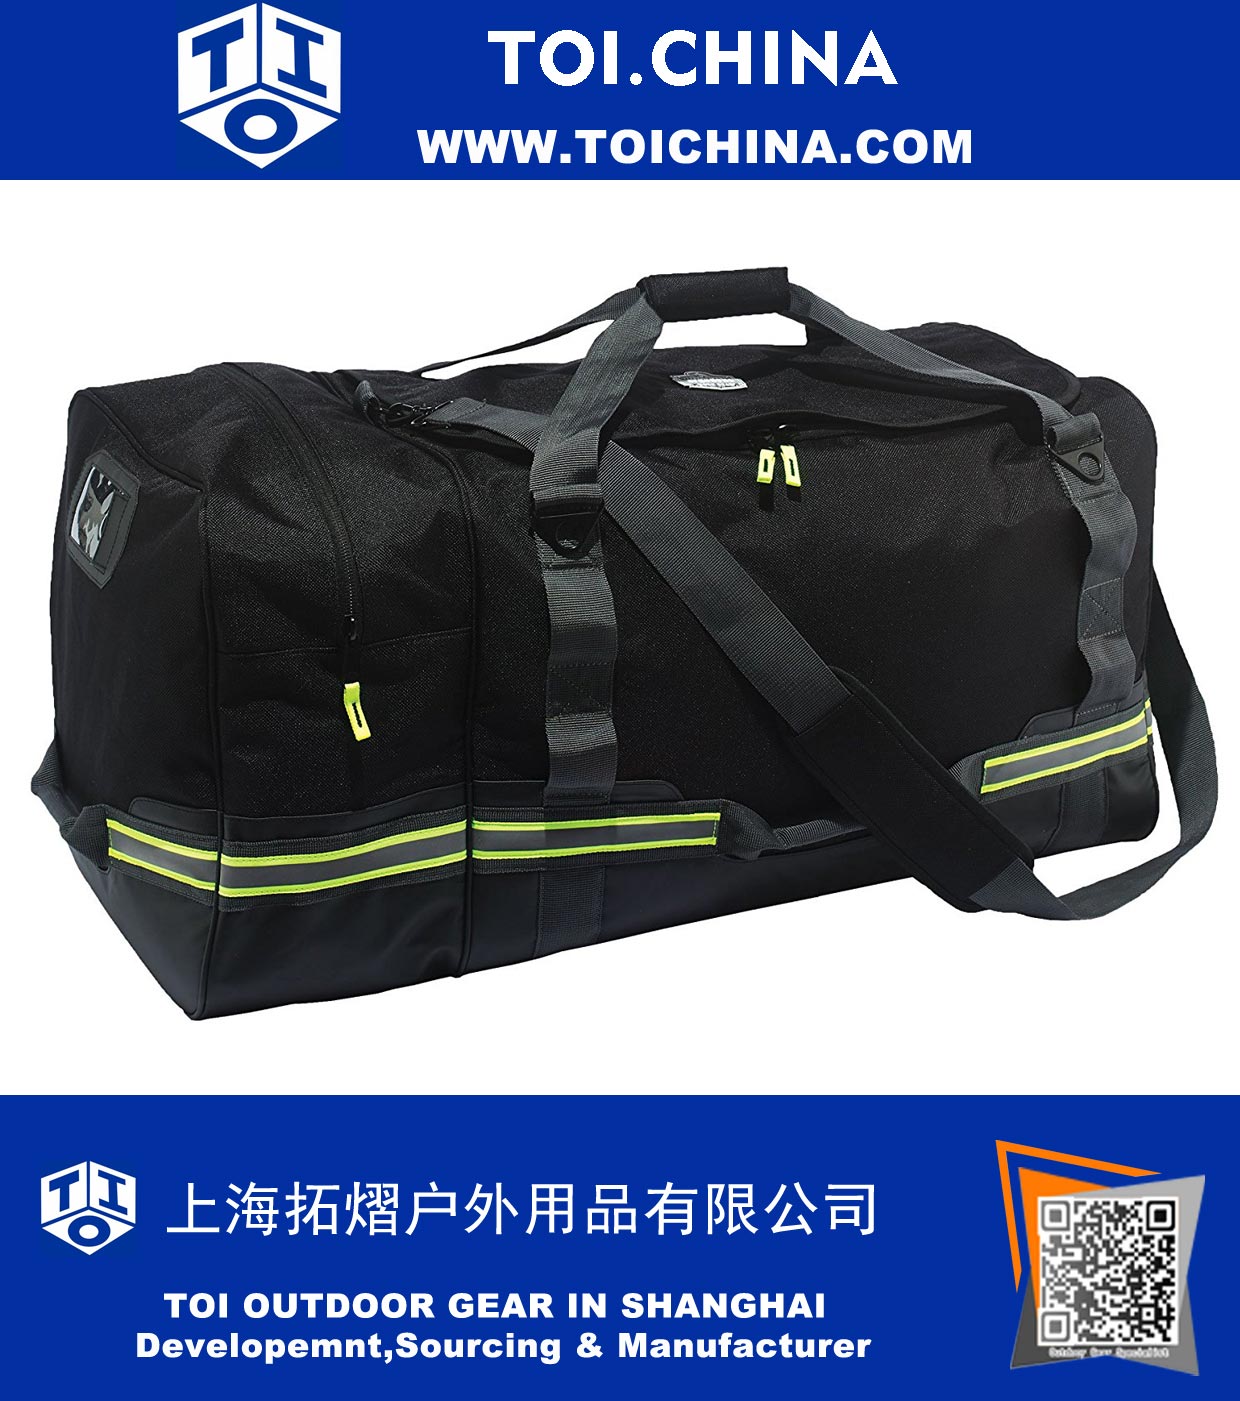 Firefighter Turnout Gear and Safety Duffel Bag for Fire, Fall Protection and Sport Gear Bag Use